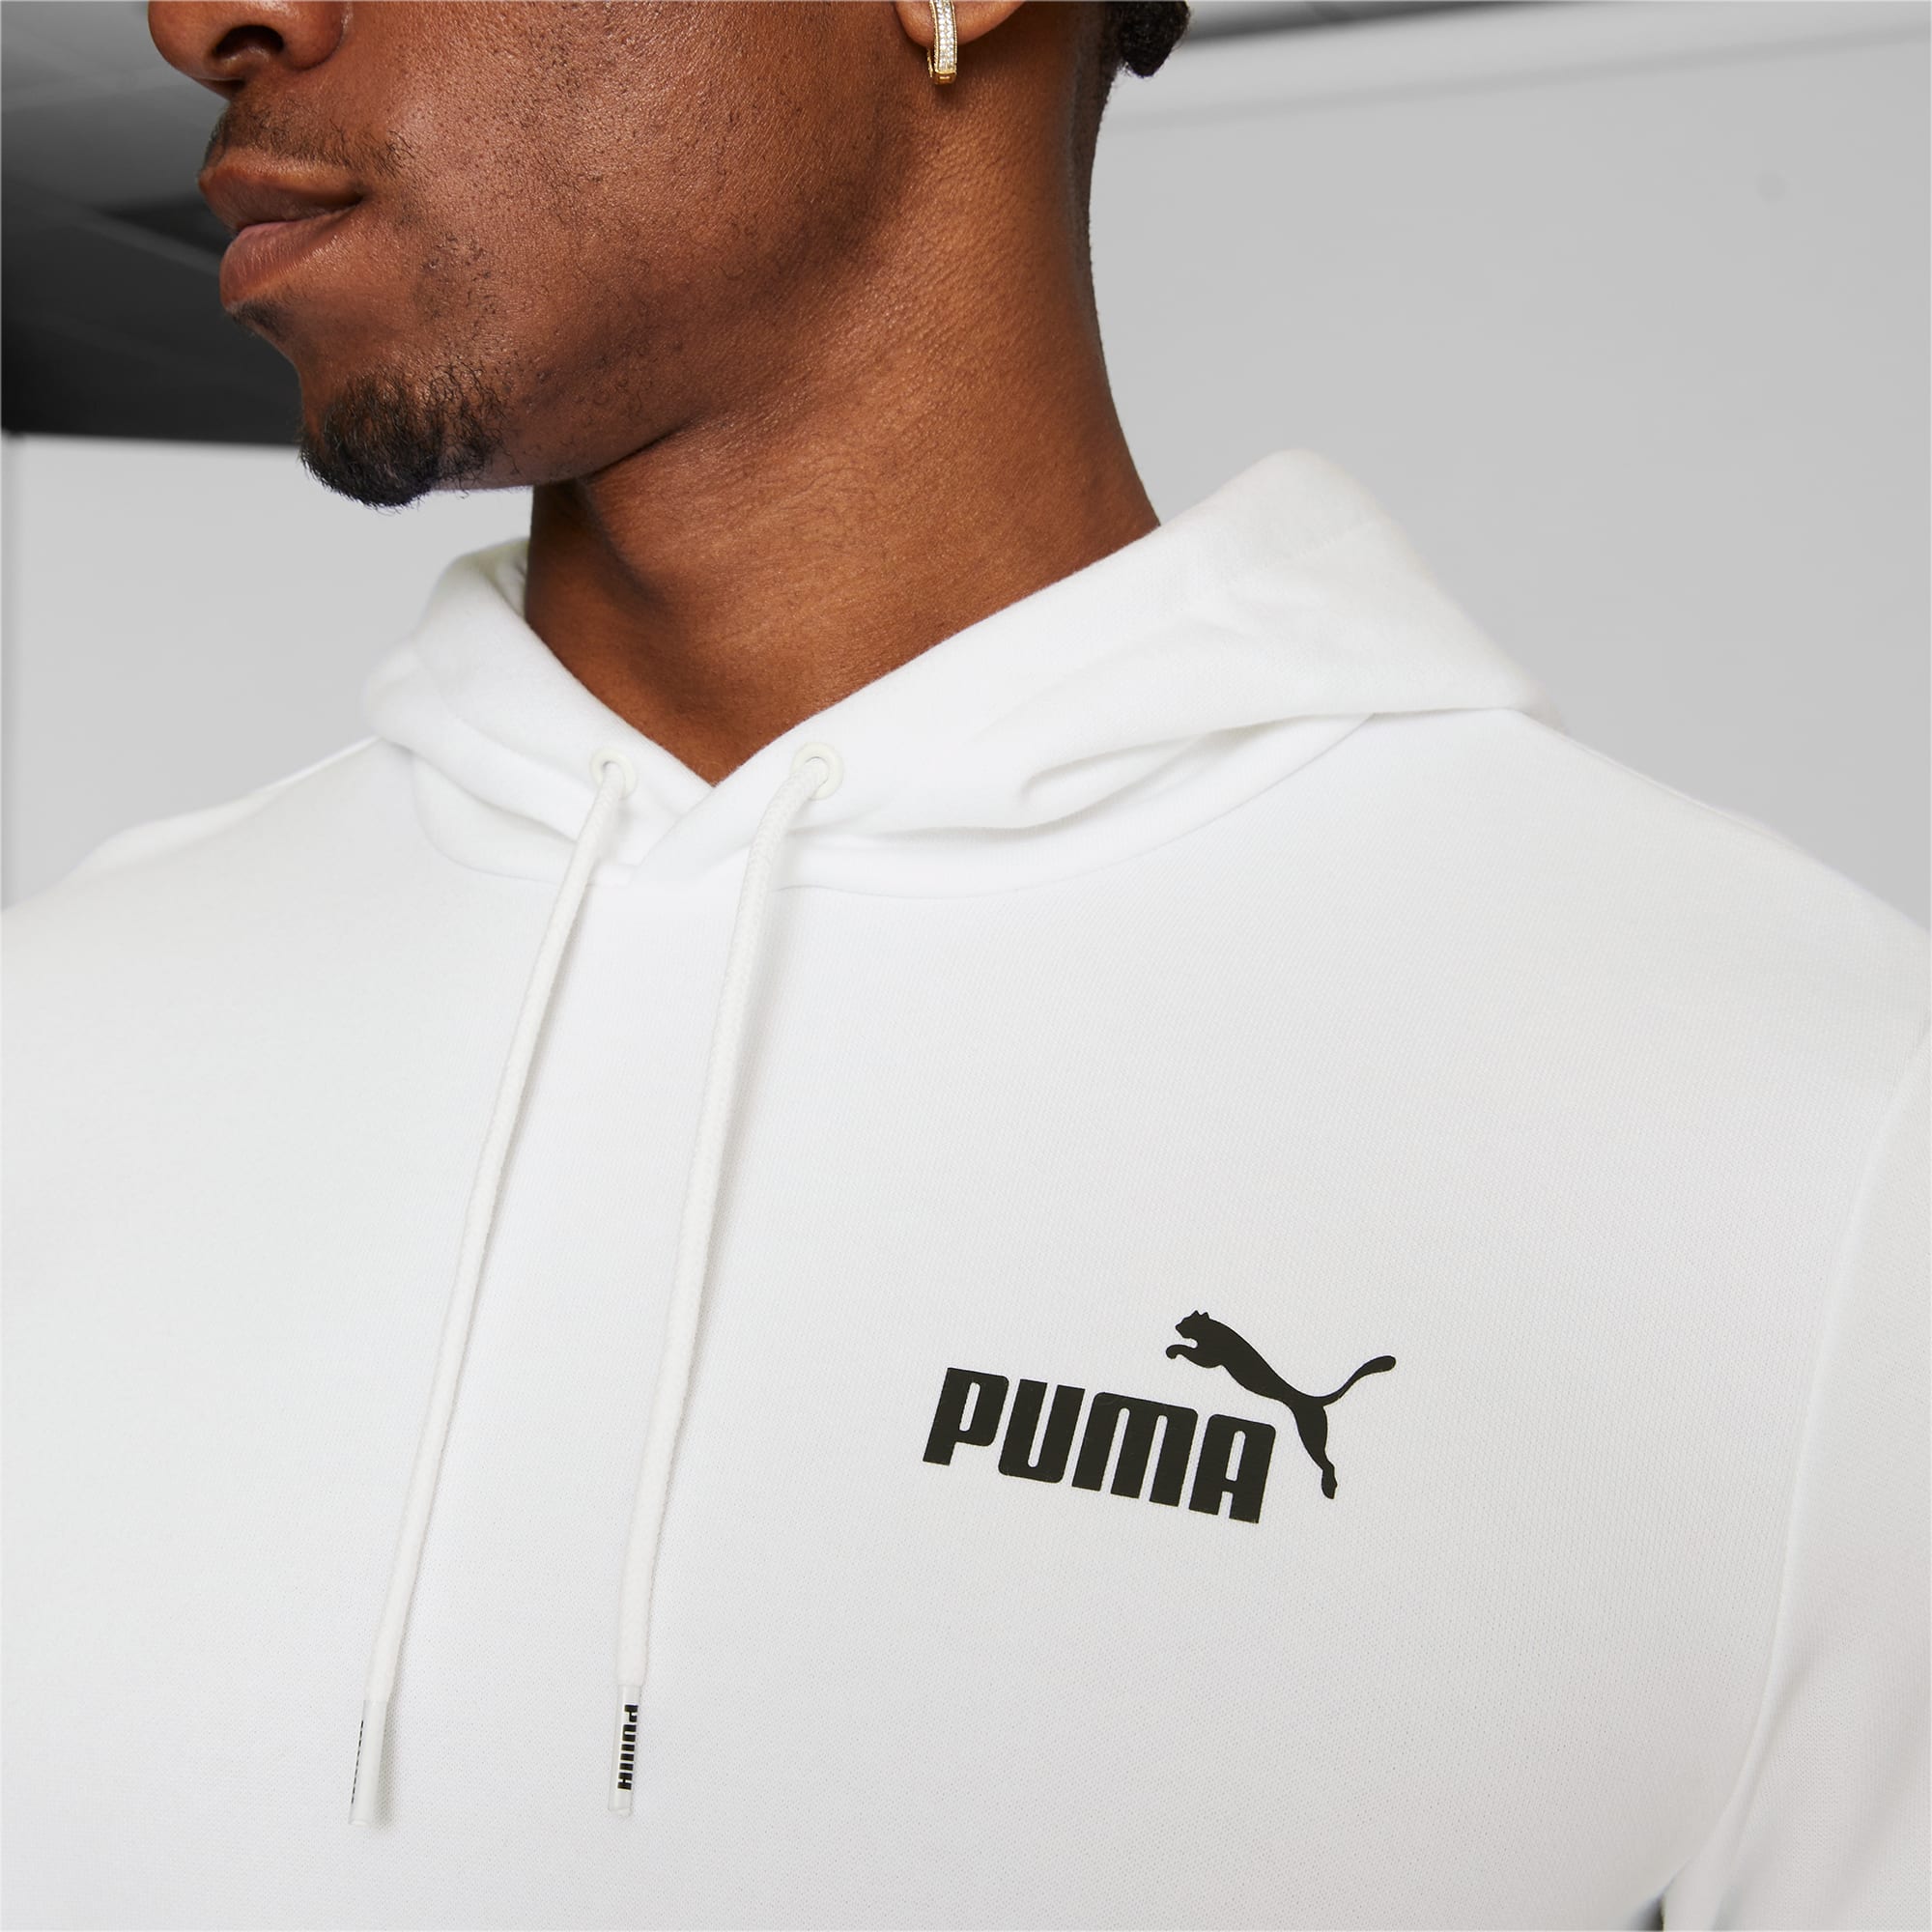 Puma, Tops, Puma Turtleneck Hoodie Black With Holographic Logo Size Small